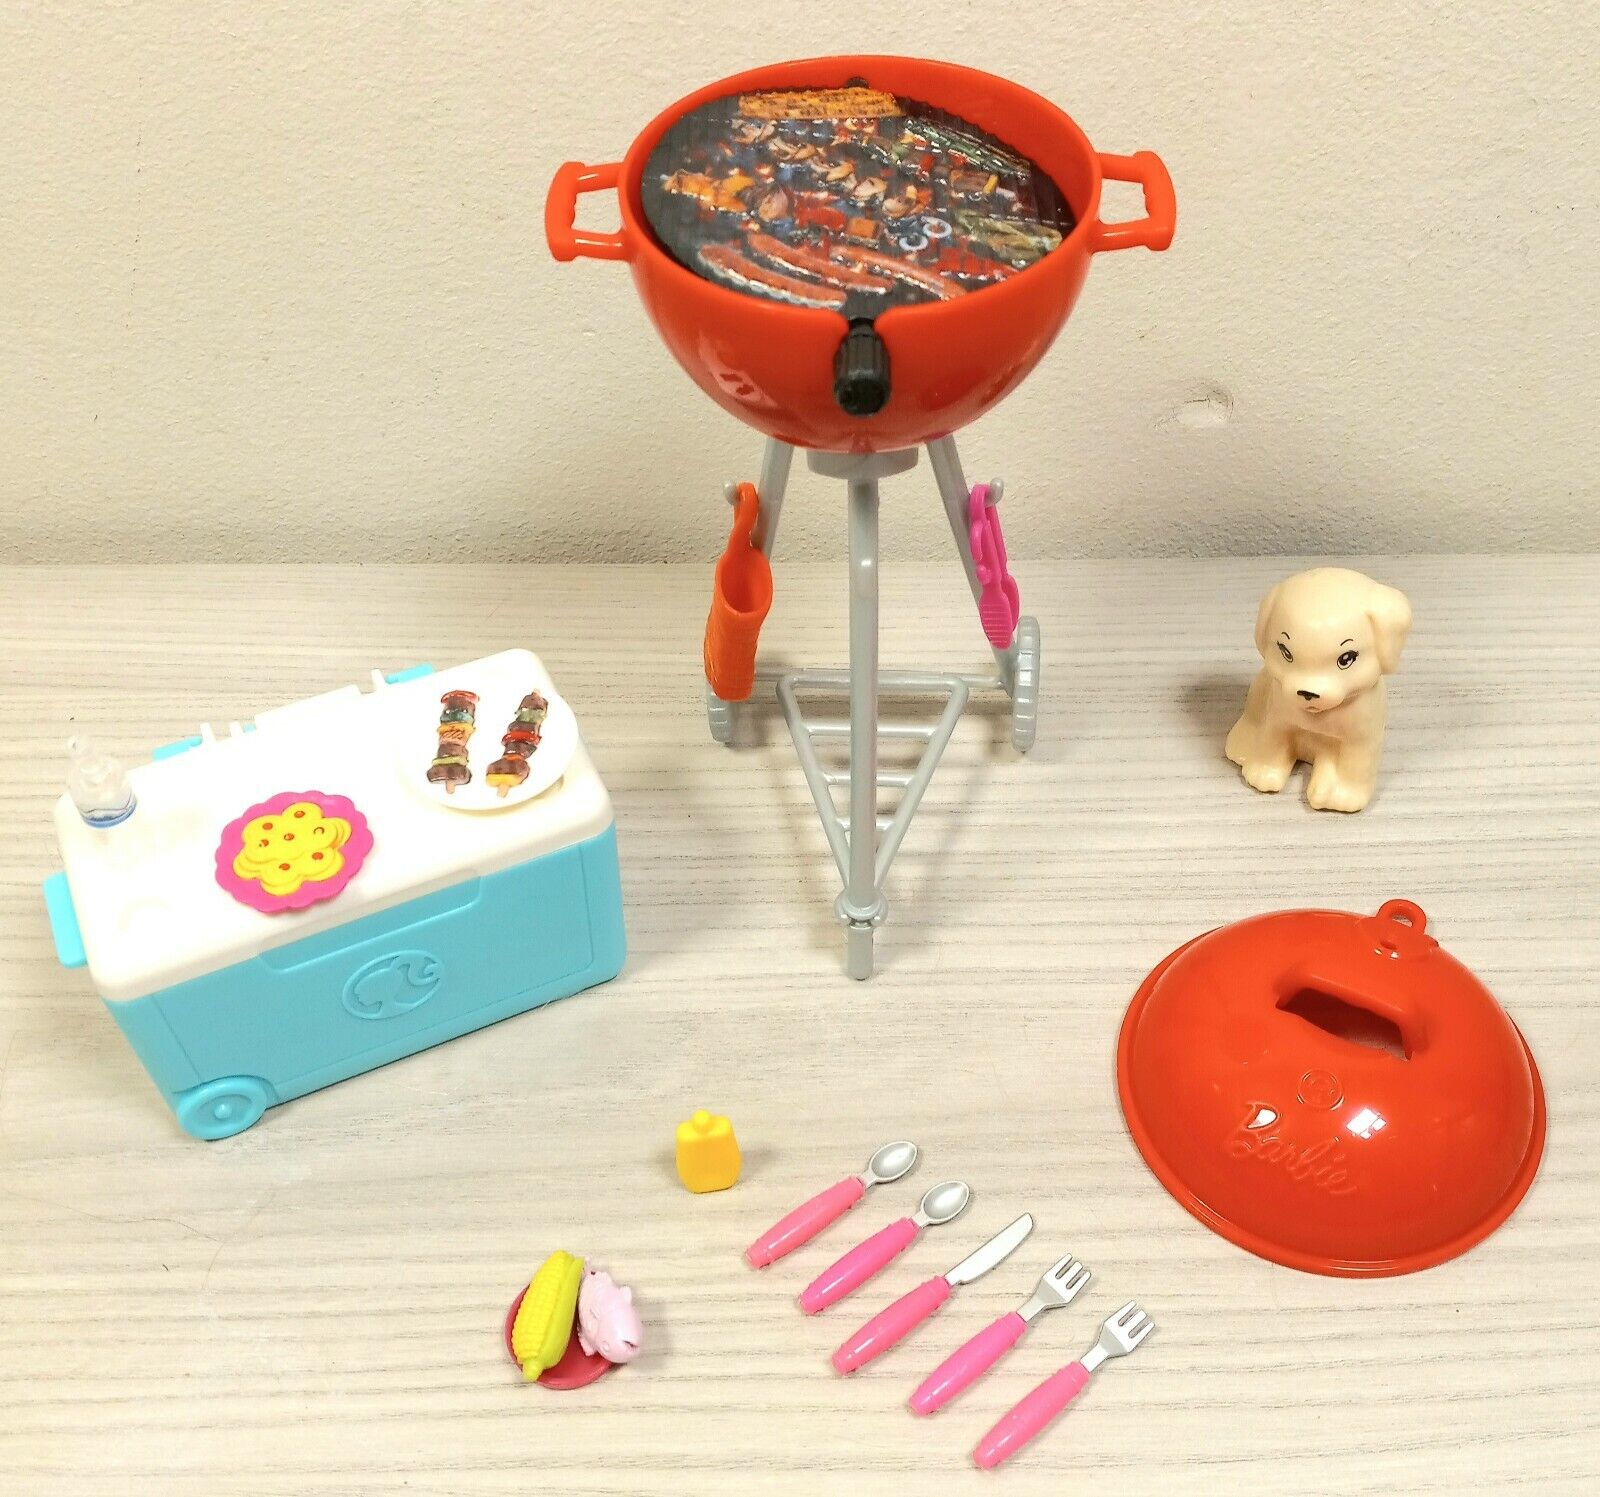 Miniature Barbecue Cookout BBQ Grill Cooler Food & Puppy Play Set Barbie Mattel Mattel